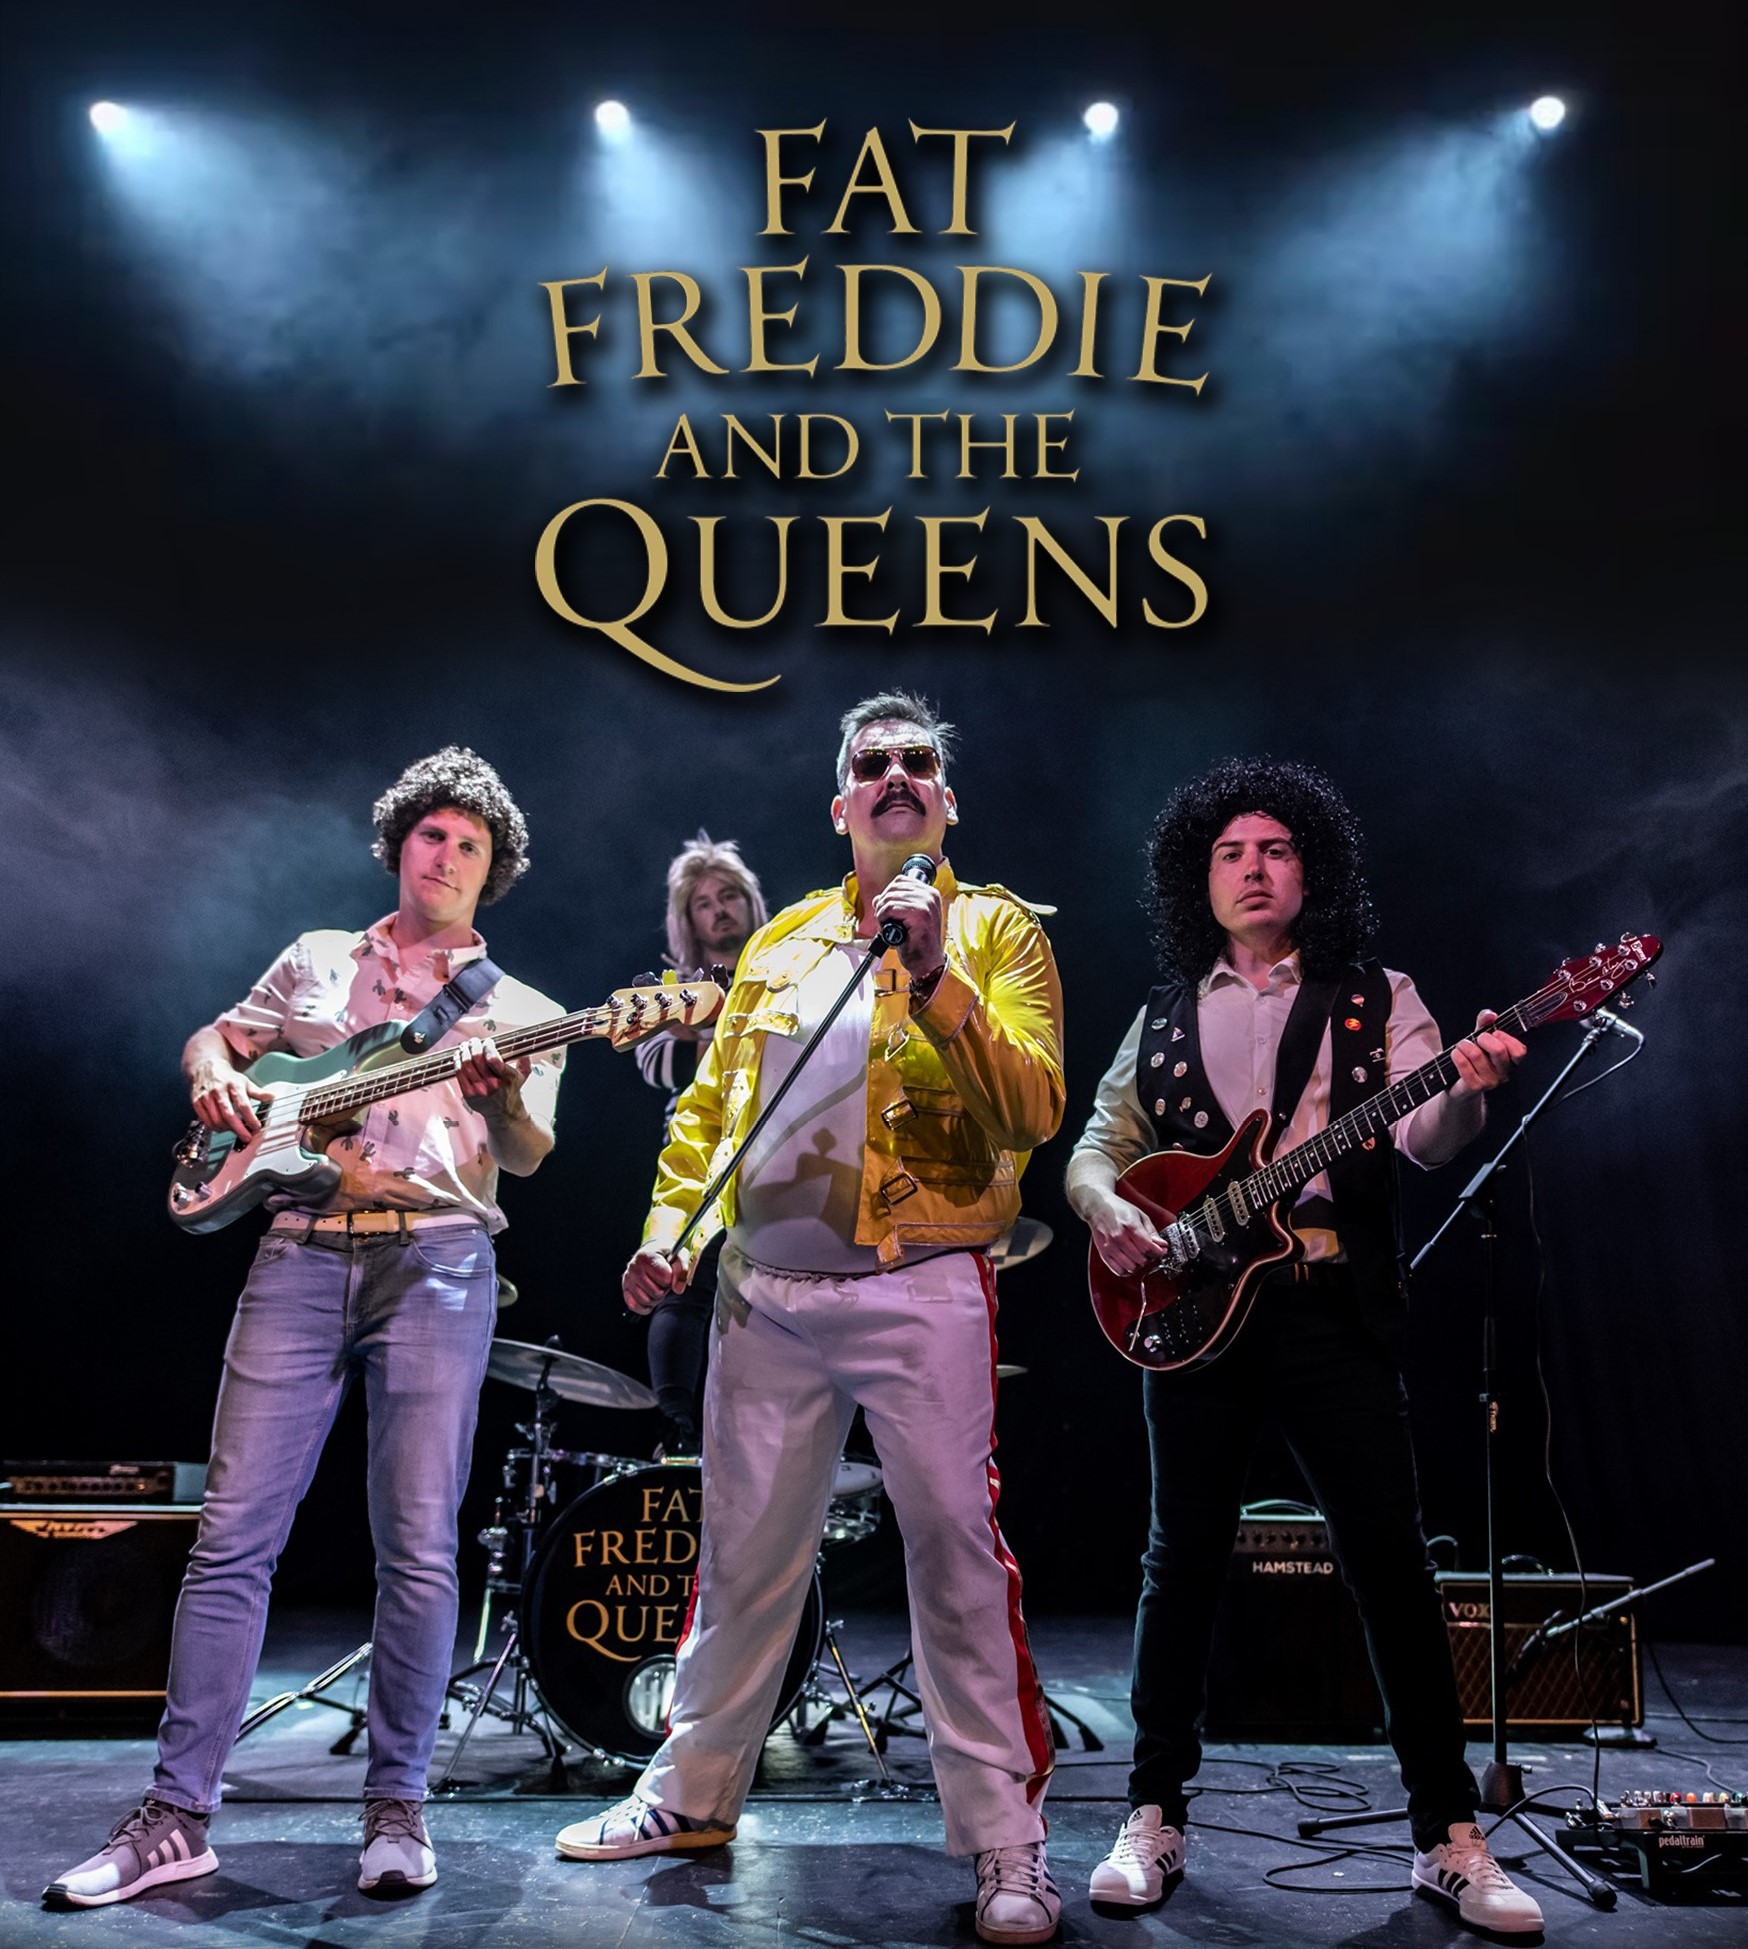 Fat Freddie and the Queens